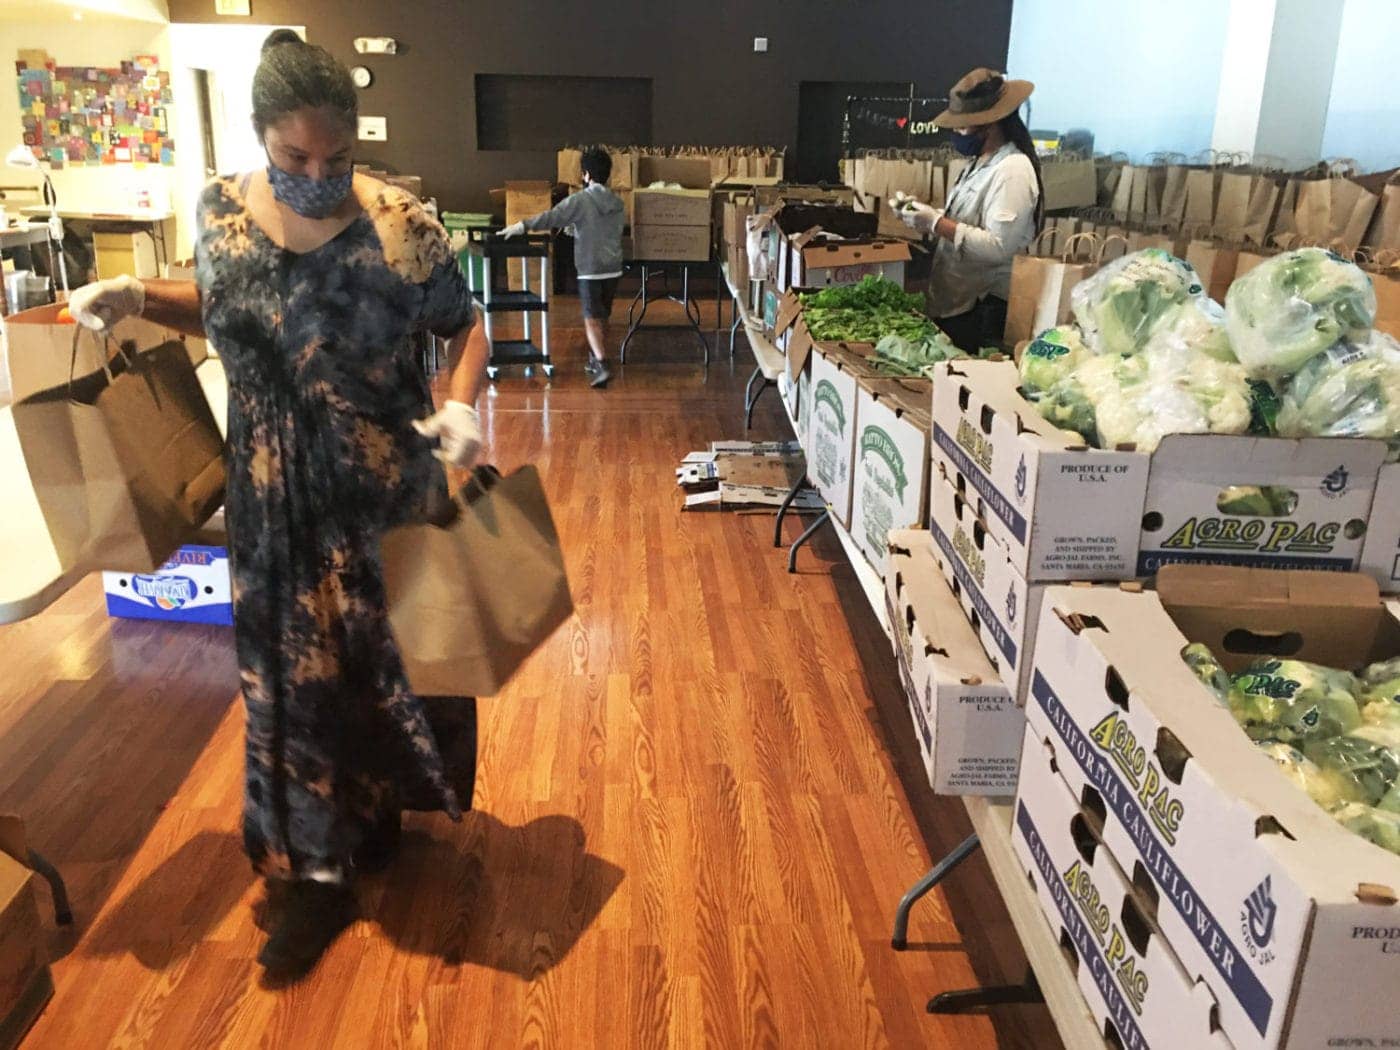 Bayview-Community-Co-op-assembles-Bounty-Bags-w-fresh-food-from-produce-market-0520-by-BCC-1400x1050, Bounty Bags, Local News & Views 